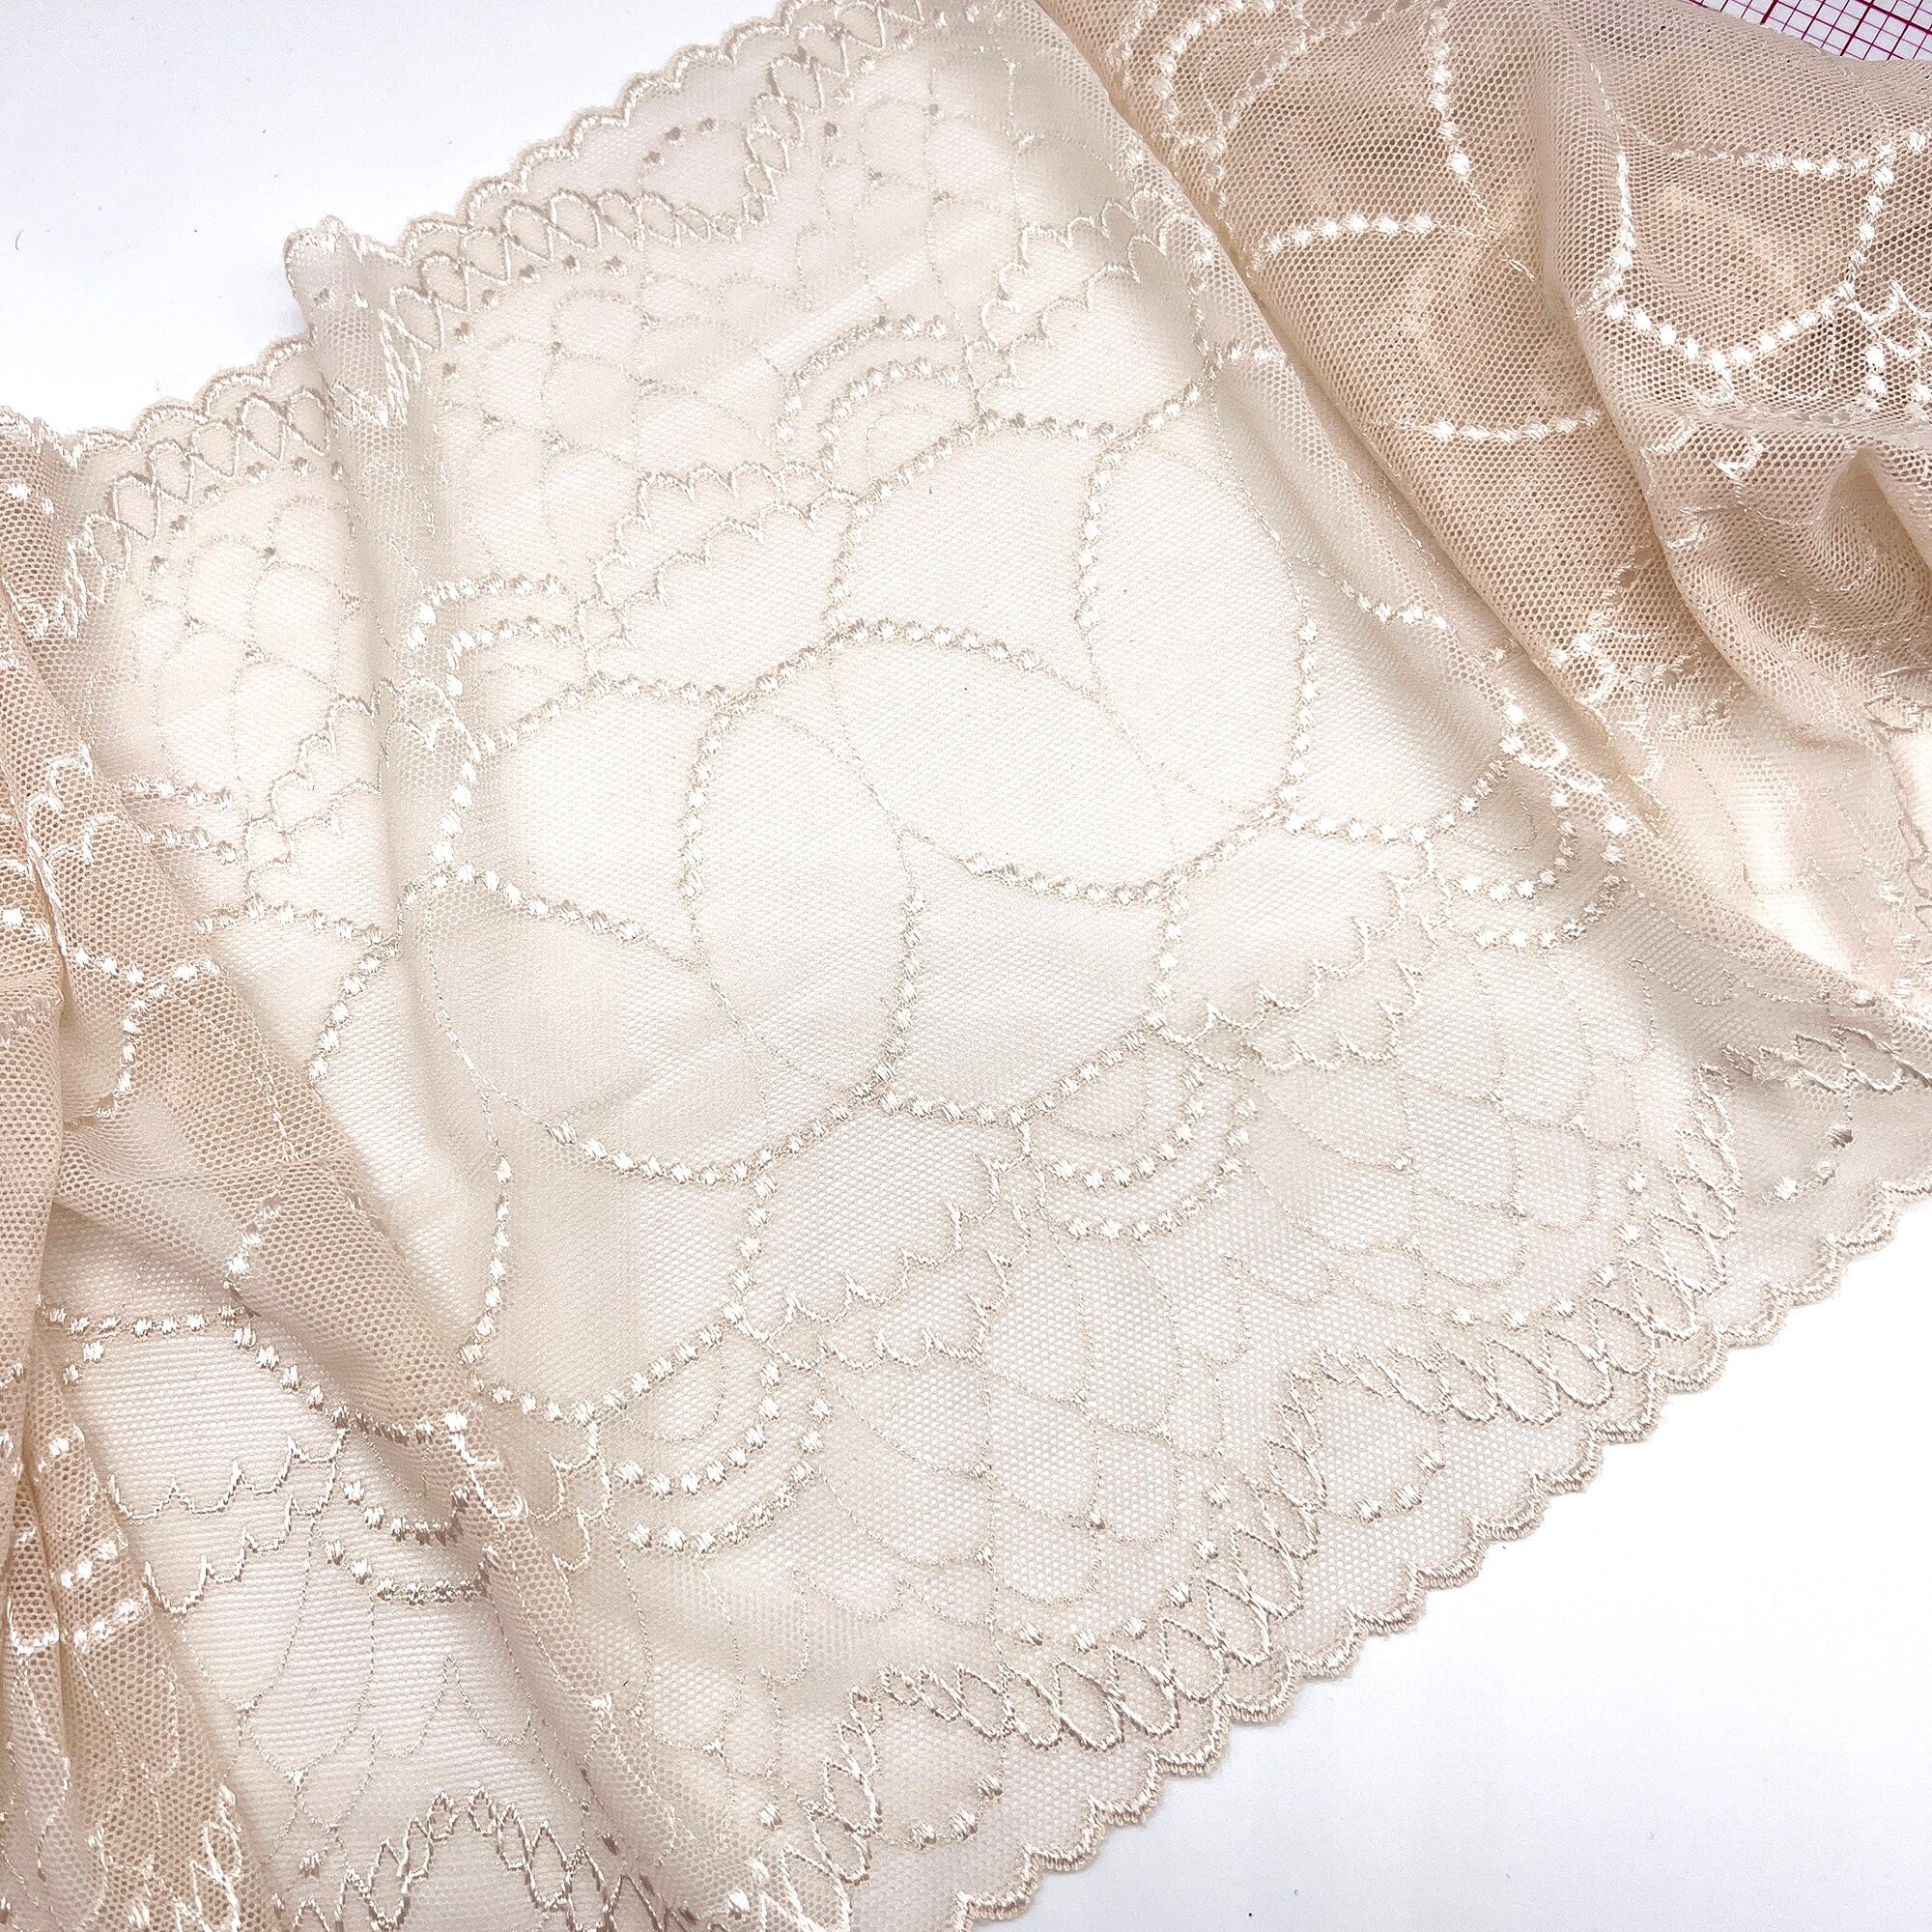 9.5" (24cm) Wide, Delicate Stretch Lace in Light Sand, Ivory, Black and White - 1 Yard-Stitch Love Studio